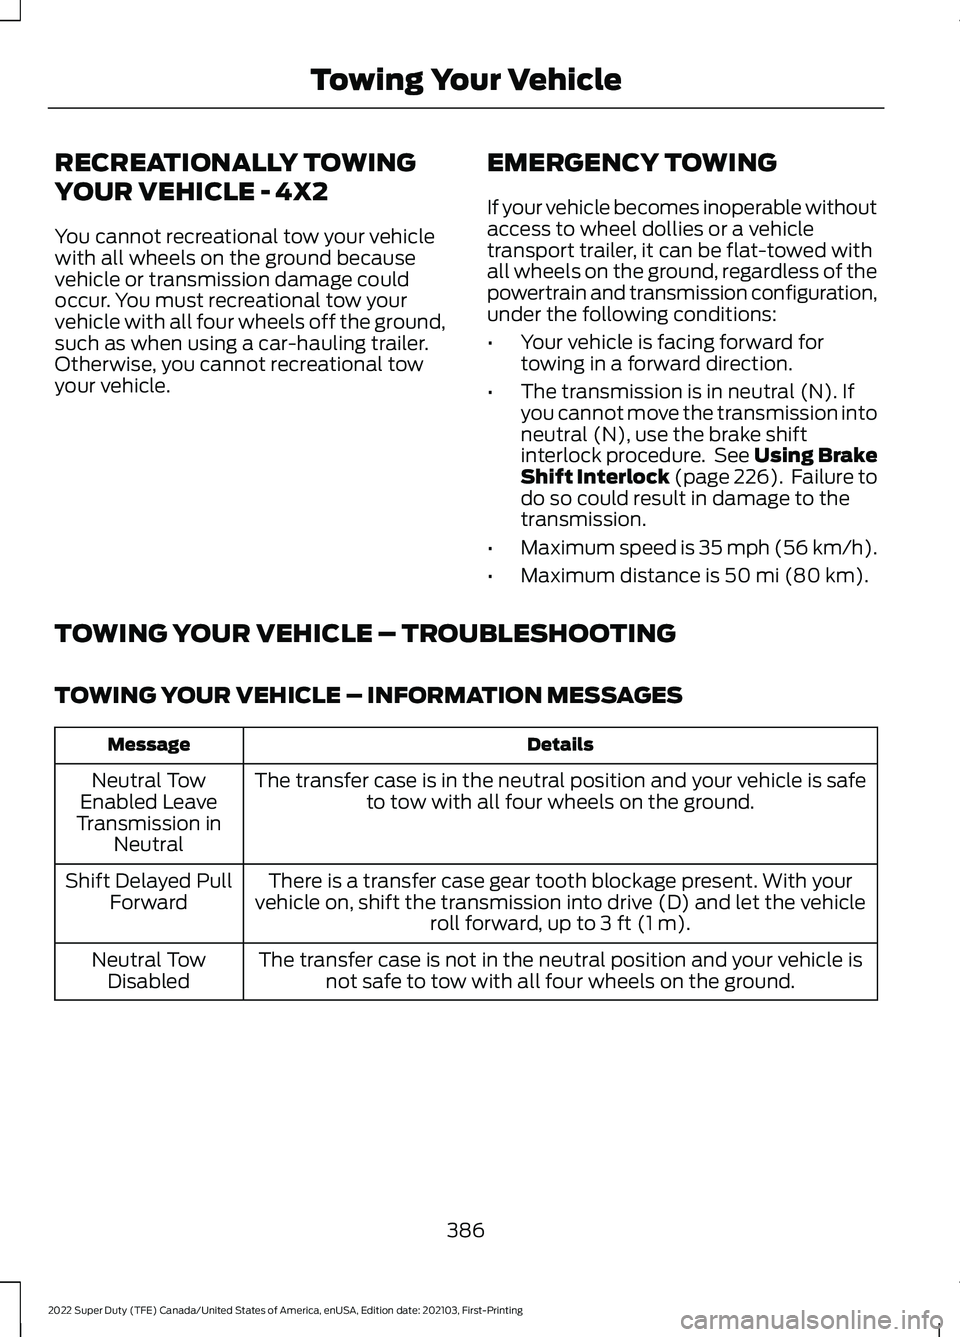 FORD F-600 2022  Owners Manual RECREATIONALLY TOWING
YOUR VEHICLE - 4X2
You cannot recreational tow your vehicle
with all wheels on the ground because
vehicle or transmission damage could
occur. You must recreational tow your
vehic